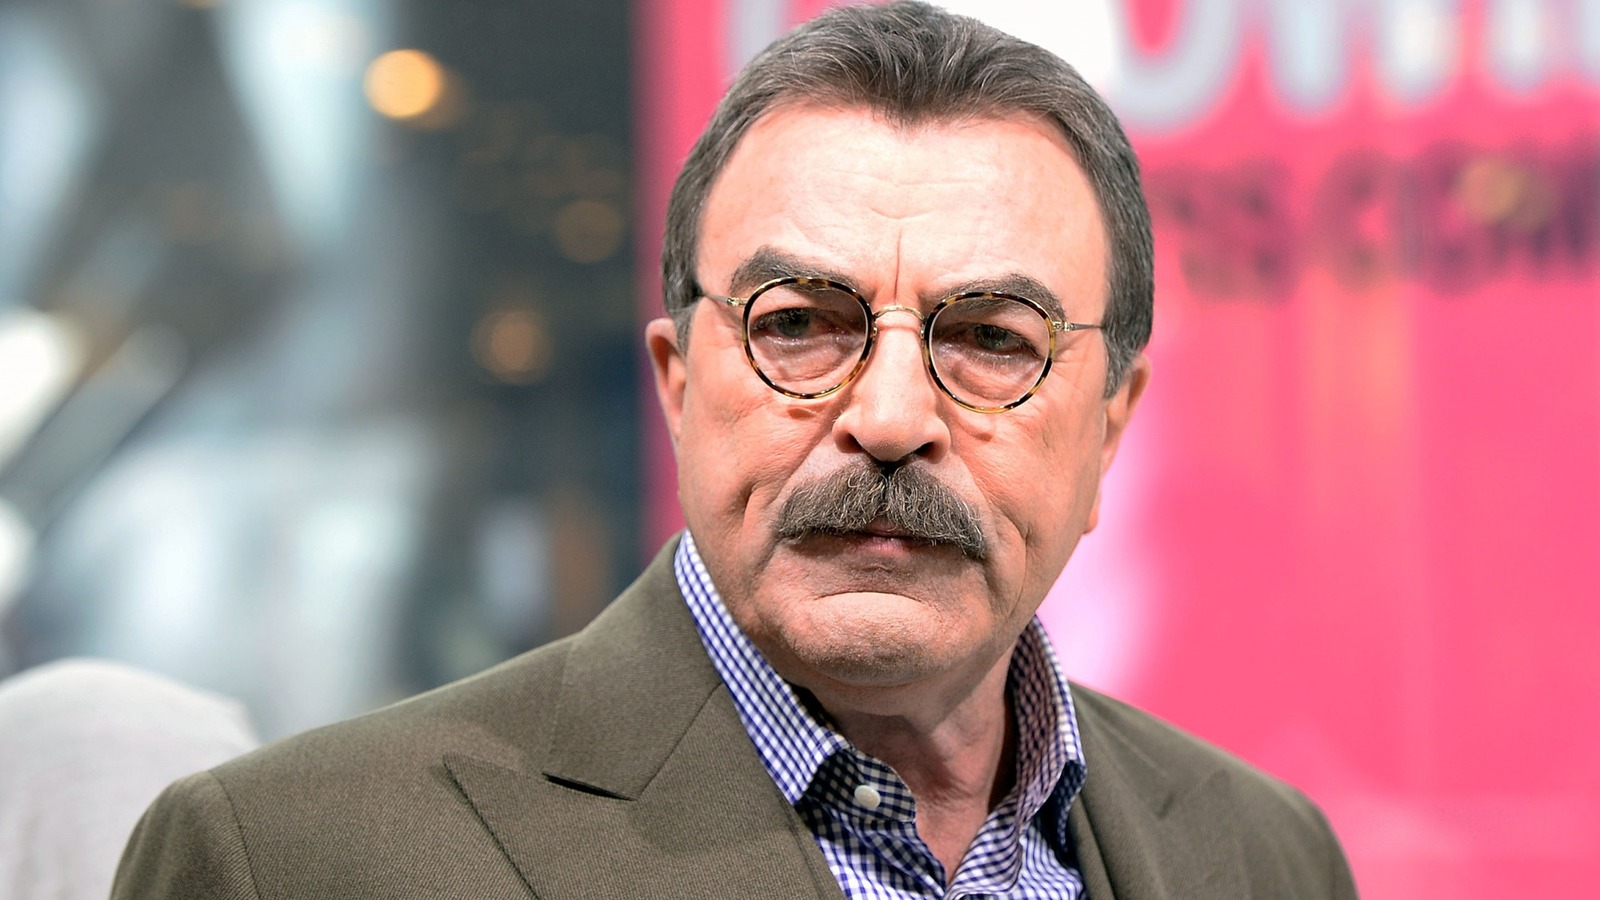 Does Tom Selleck Support Donald Trump?